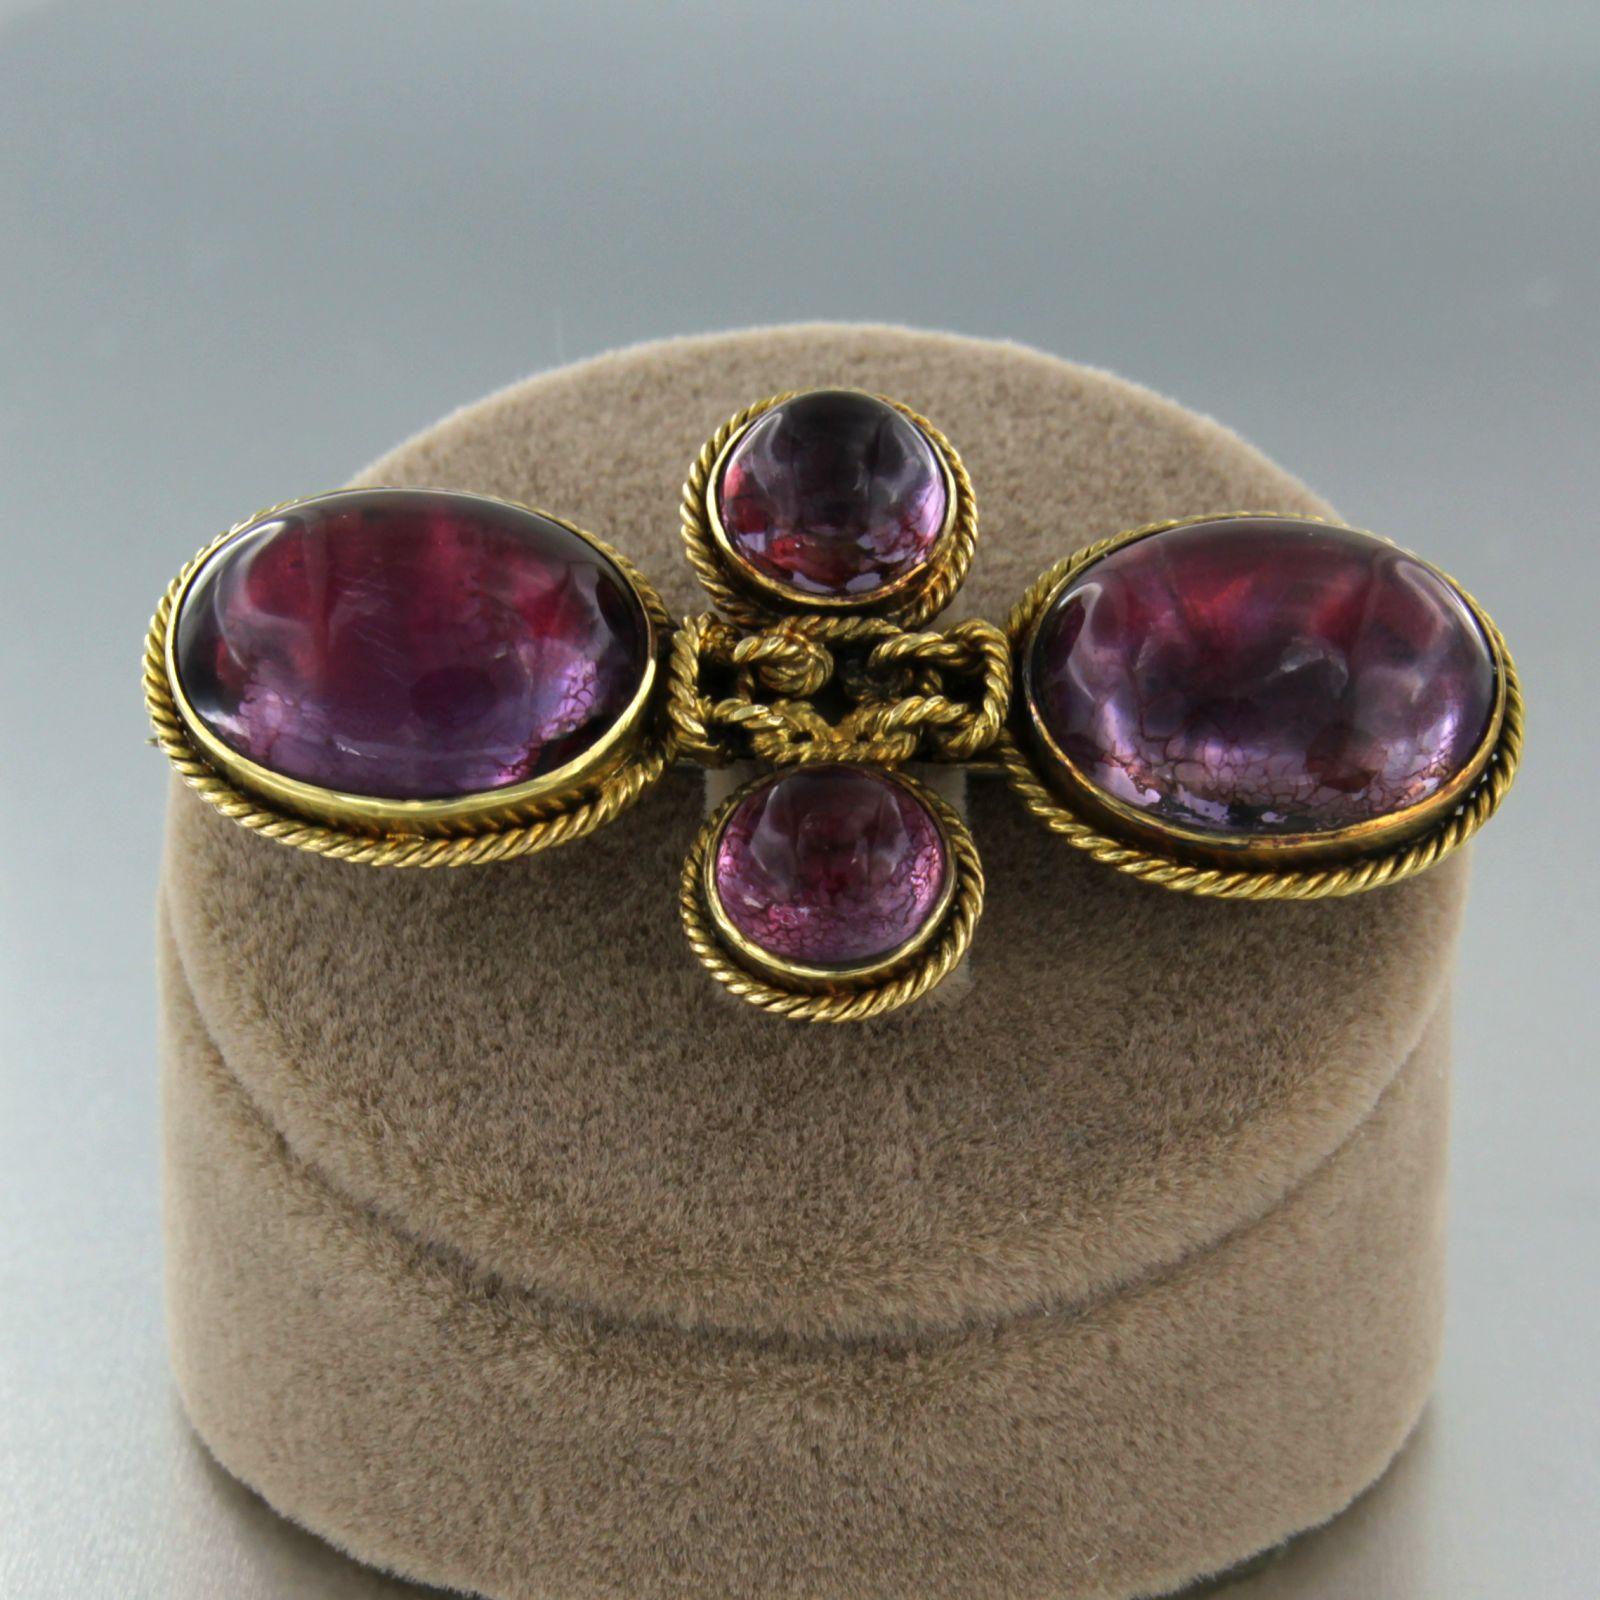 14 karat yellow gold brooch with four pink tourmaline

The tourmaline are 1.4 x 1.6 oval cabochon cut (2 pieces) and  0.8 cm round cabochon cut (2 pieces)

Weigth : 13.3 gram
Dimensions : 5.0 cm x 2.5 cm